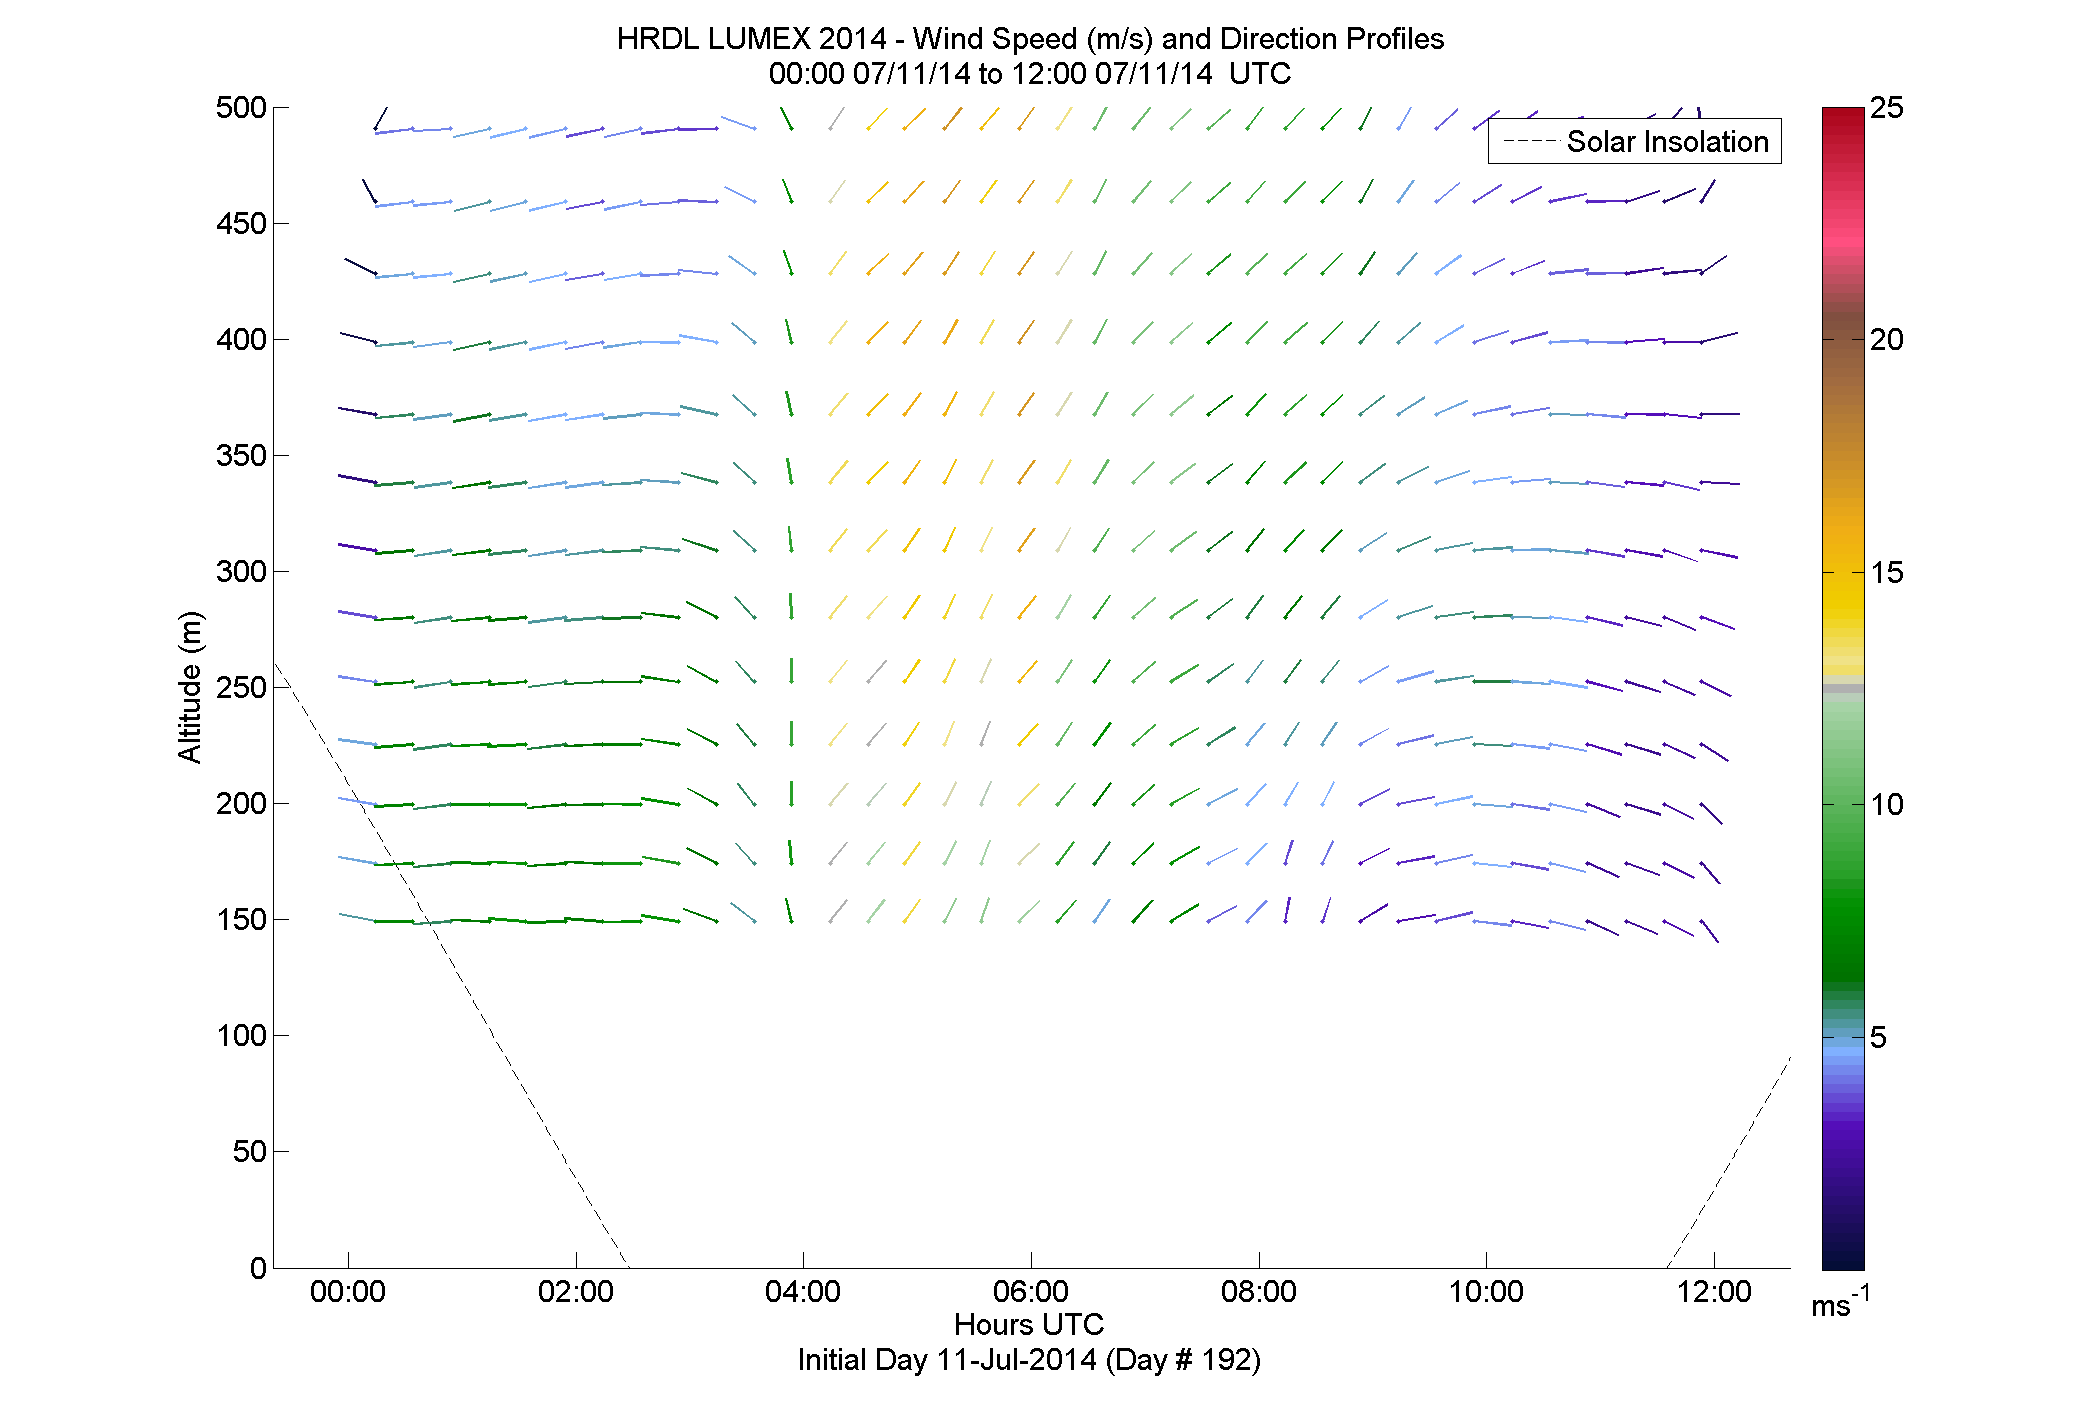 HRDL speed and direction profile - July 11 am